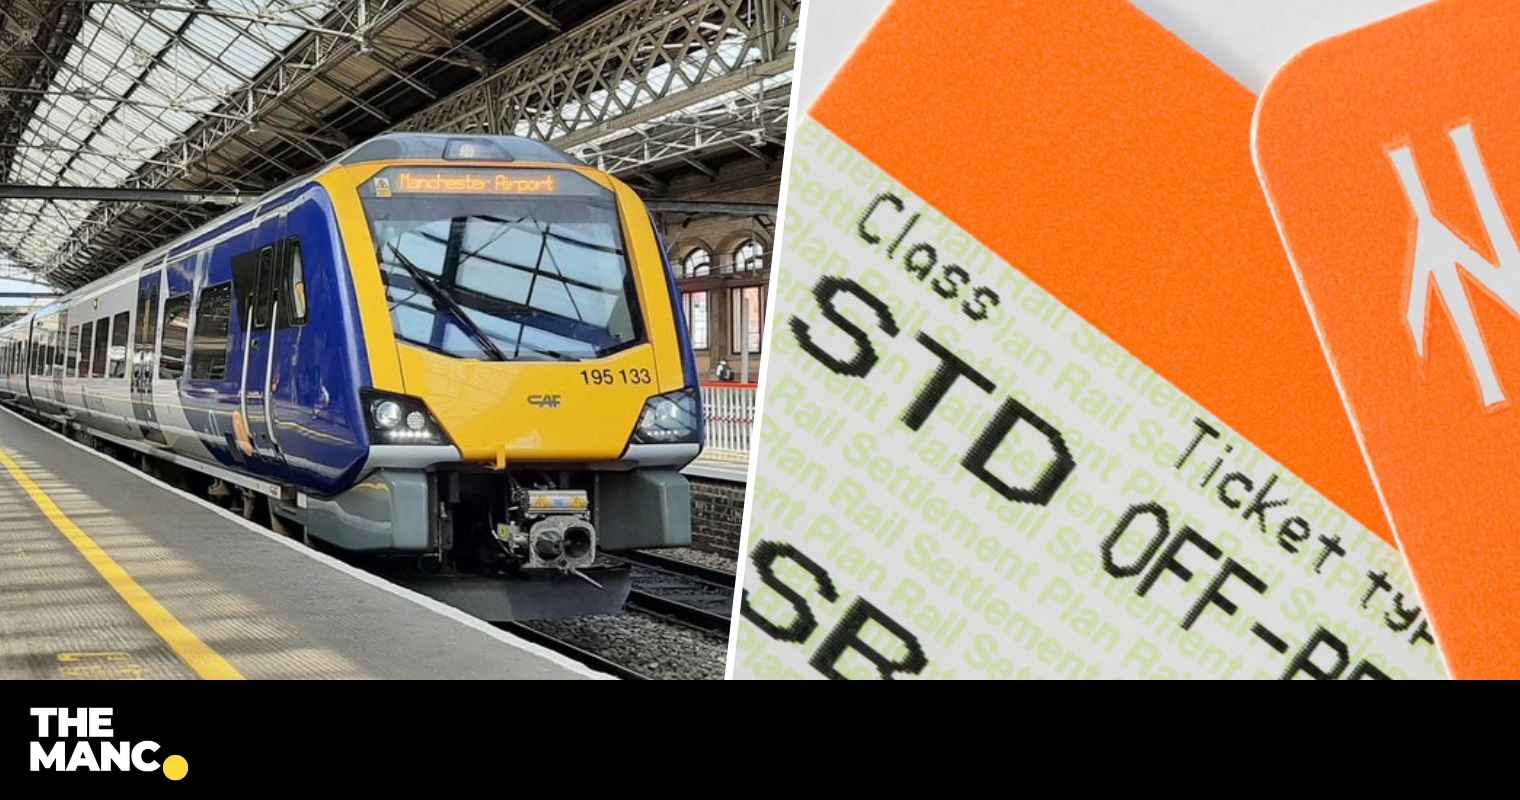 Final call for £1 train tickets: Northern's 'Flash Sale' closes at